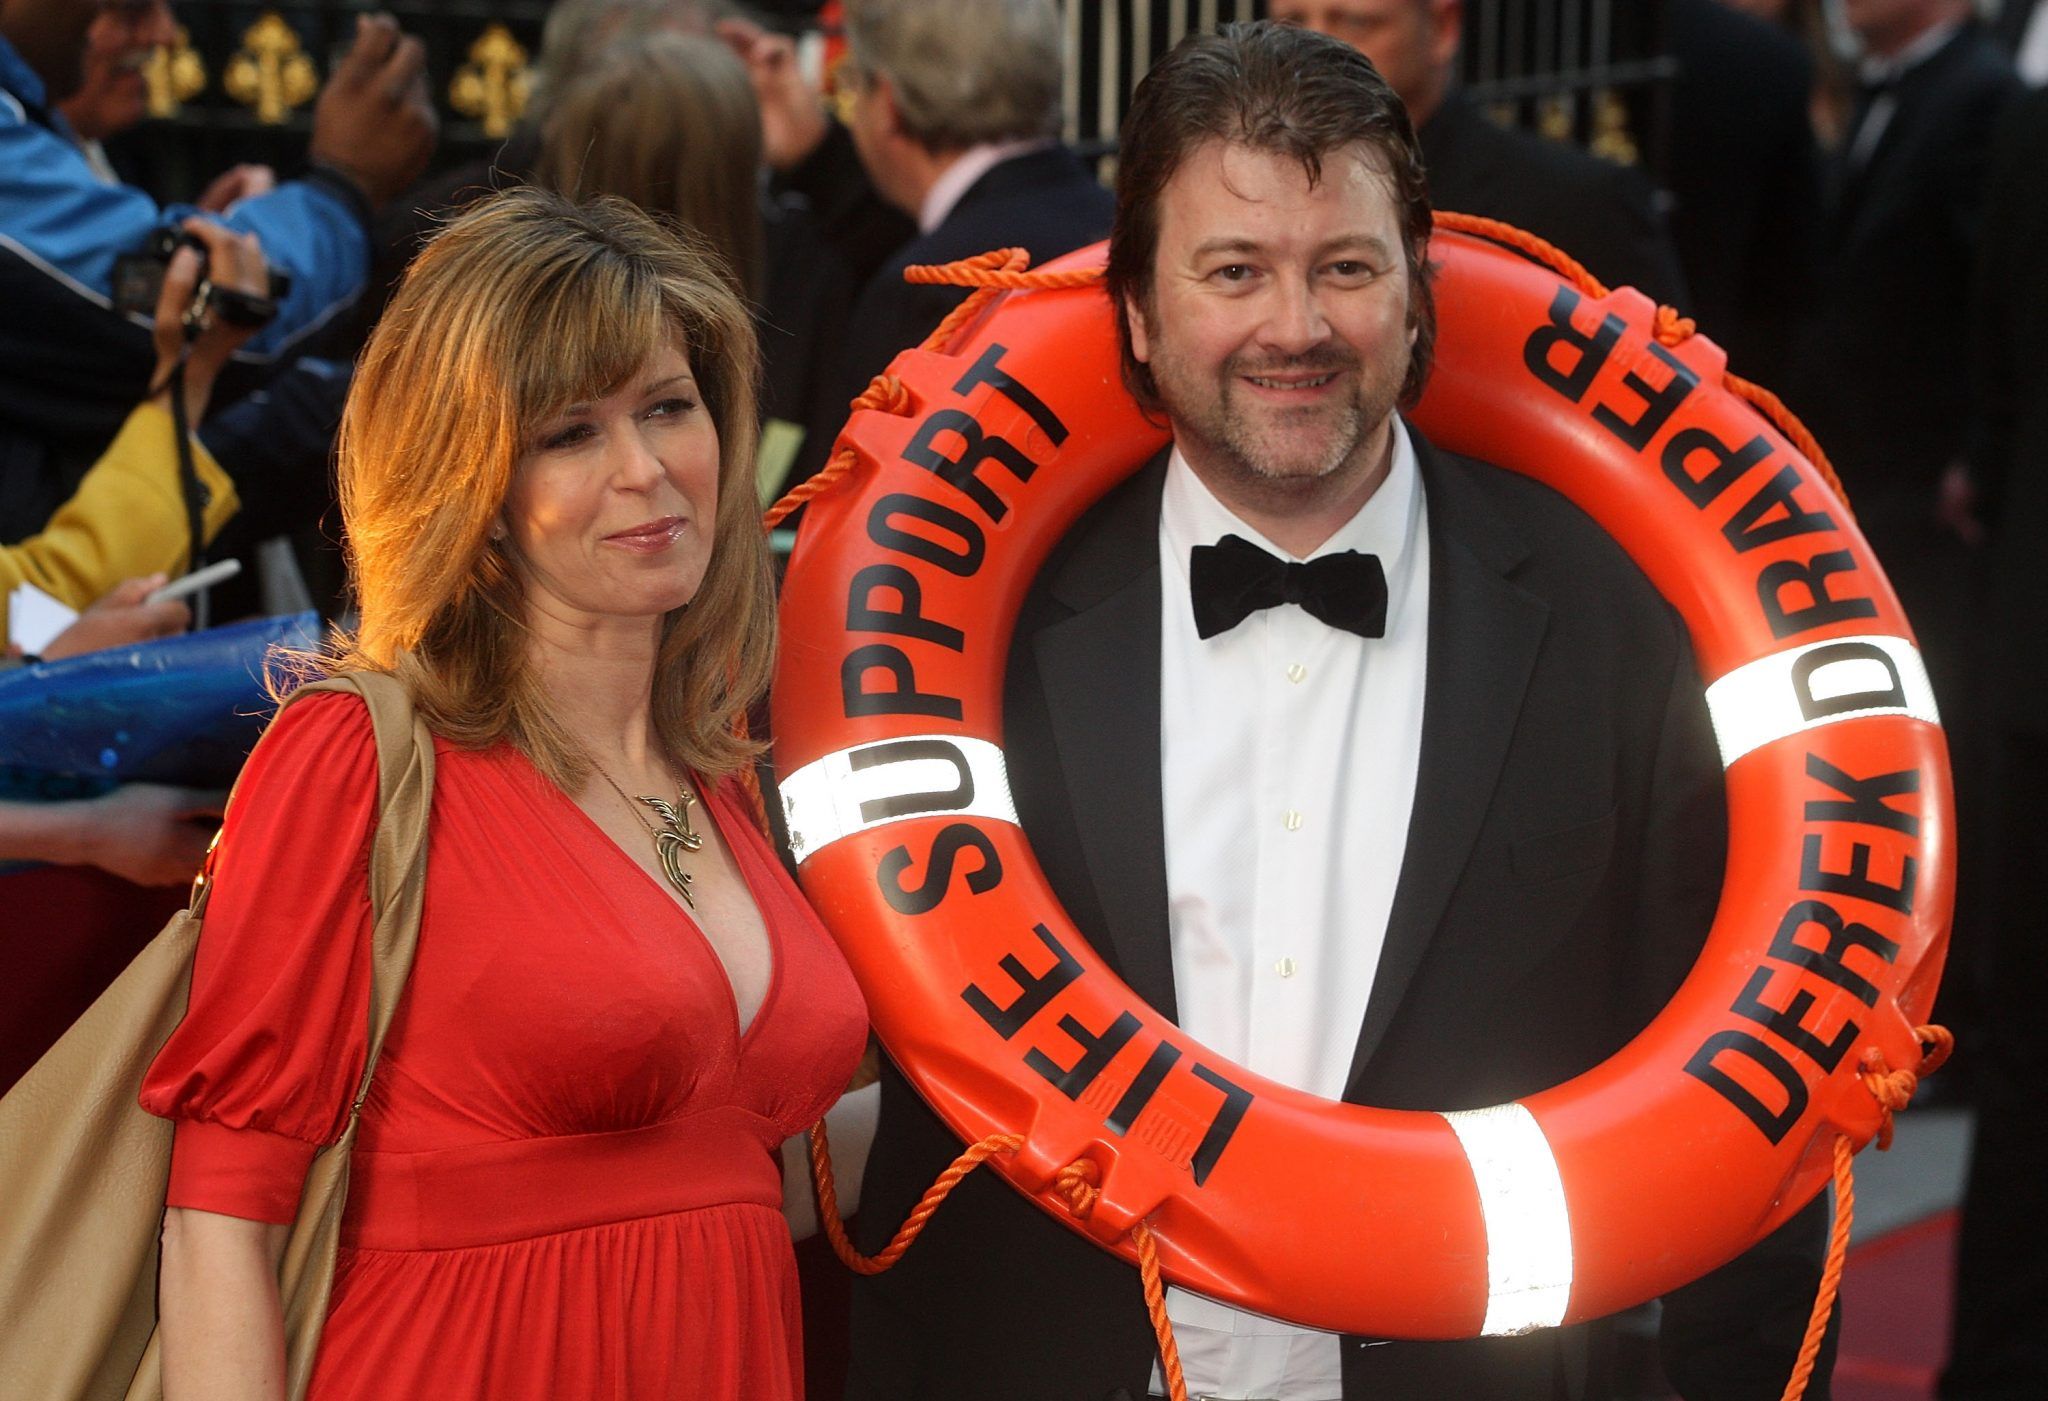 LONDON - APRIL 03: Kate Garraway and Derek Draper attend the Galaxy British Book Awards at Grosvenor House Hotel on April 3, 2009 in London, United Kingdom. (Photo by Danny Martindale/Getty Images)